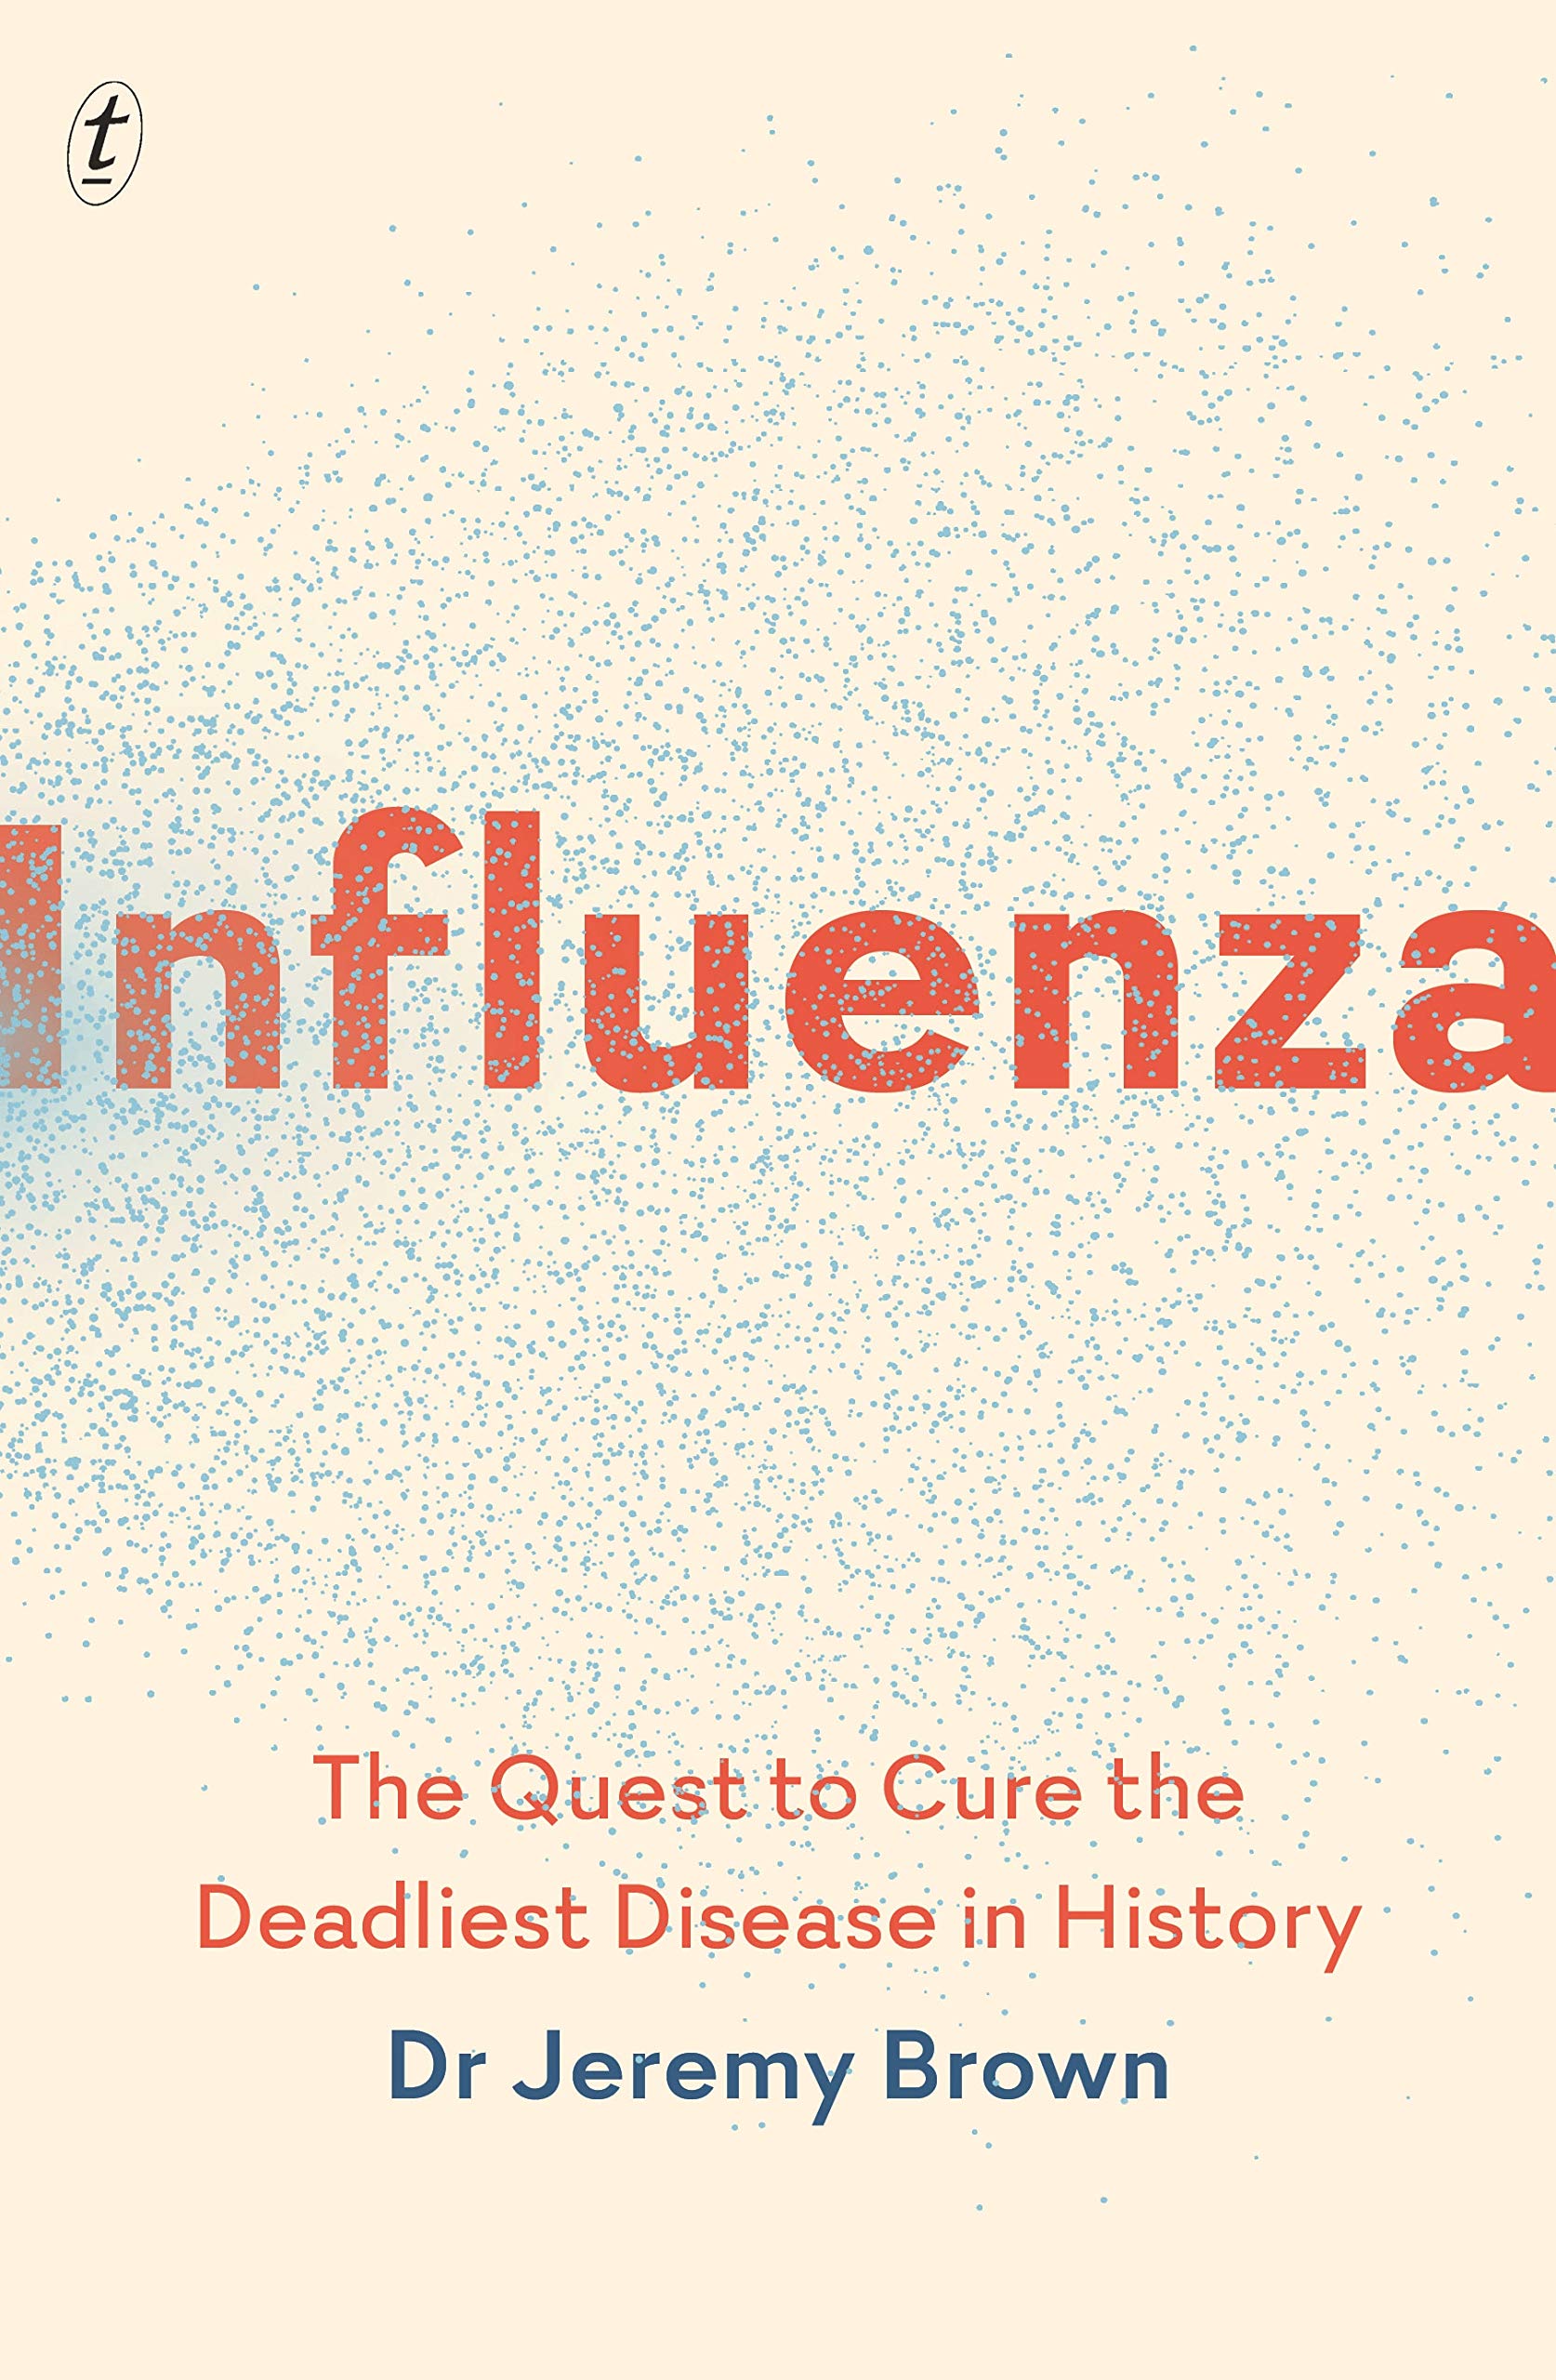 Influenza: The Quest to Cure the Deadliest Disease in History